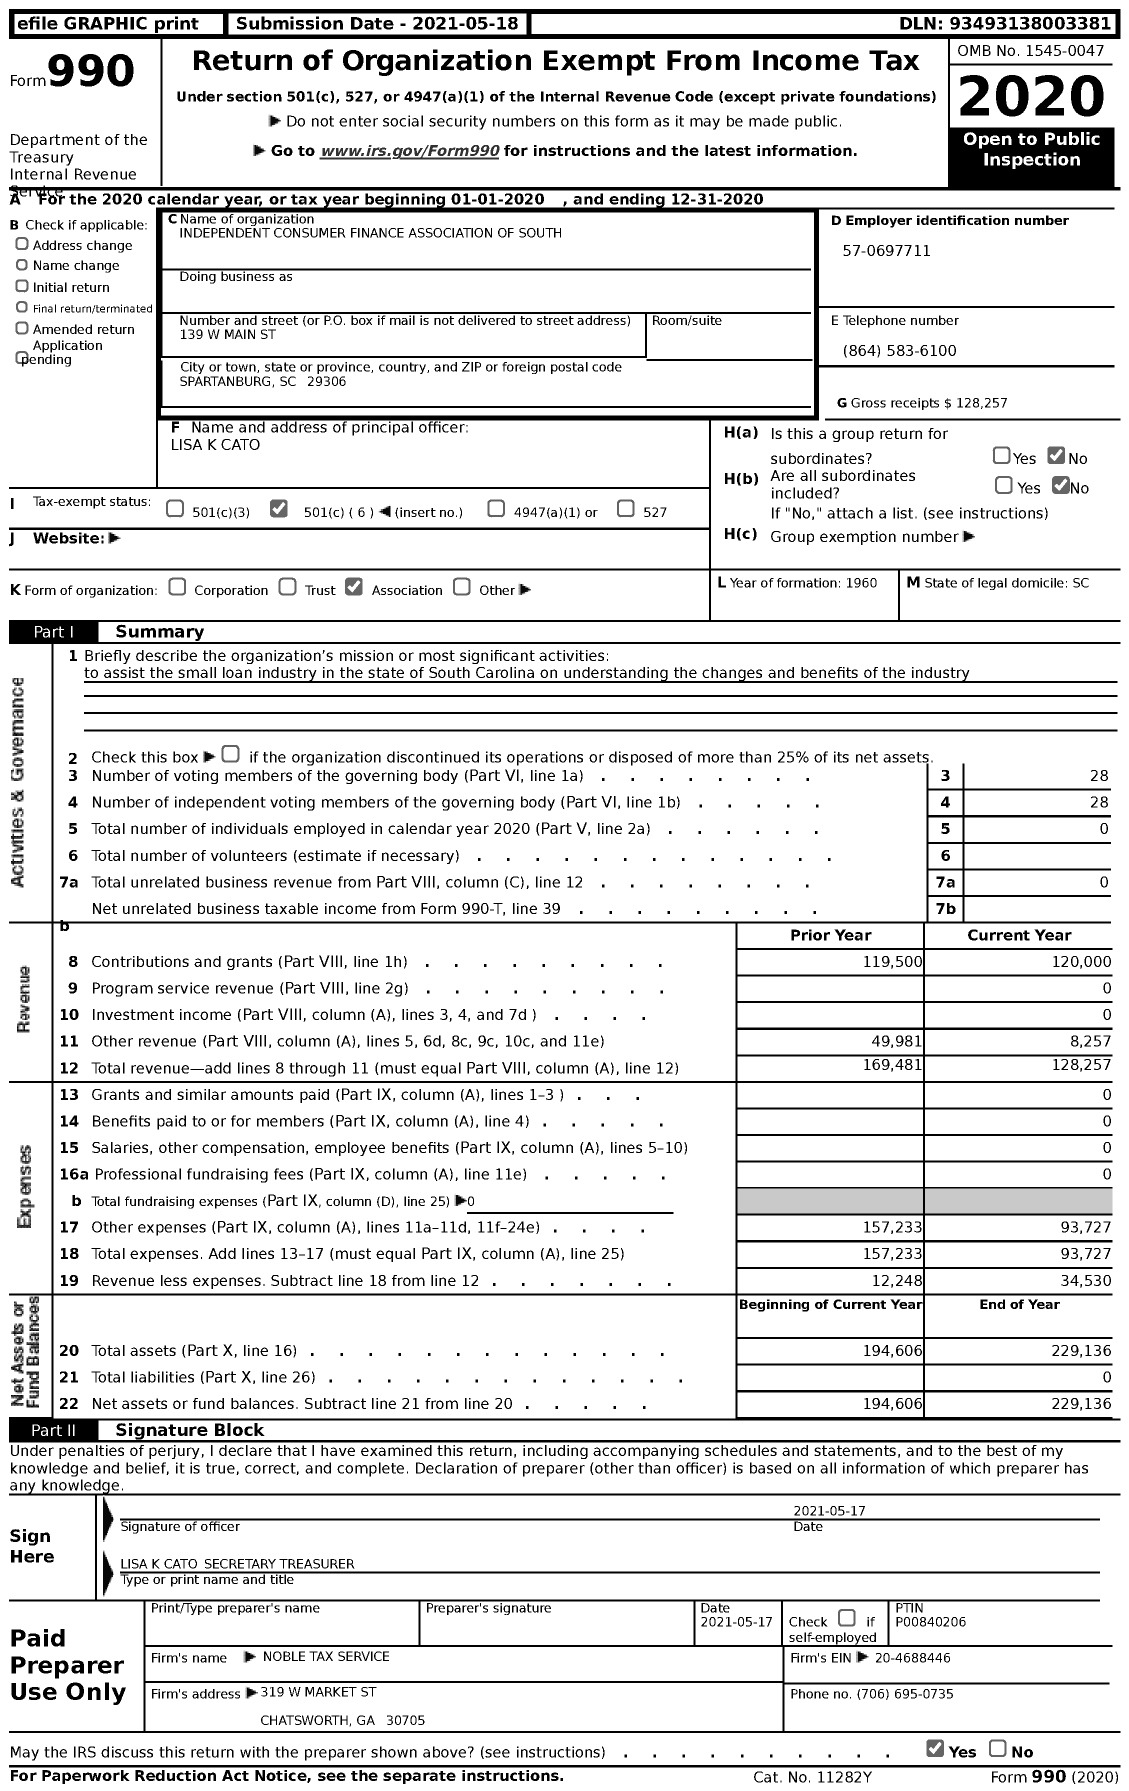 Image of first page of 2020 Form 990 for Independent Consumer Finance Association of South Carolina